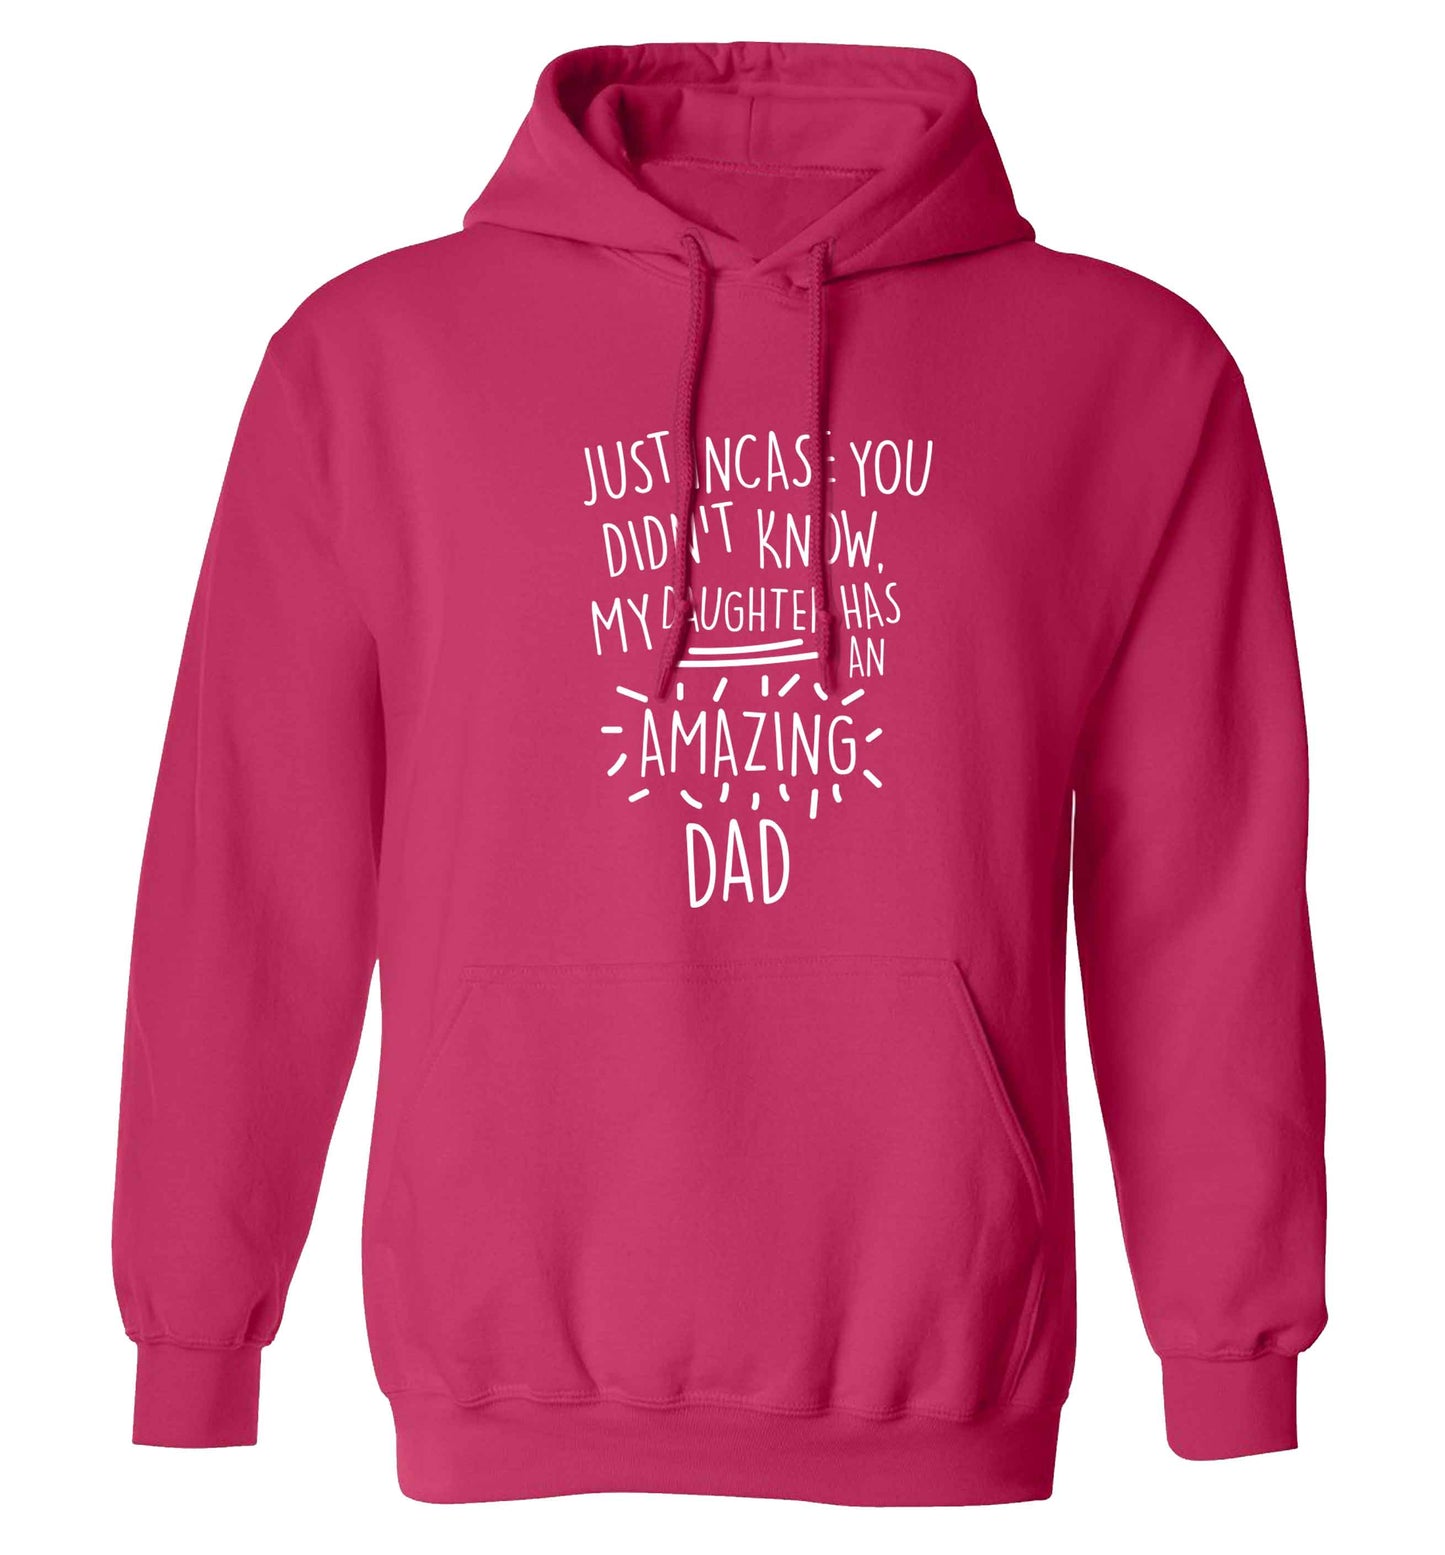 Just incase you didn't know my daughter has an amazing dad adults unisex pink hoodie 2XL